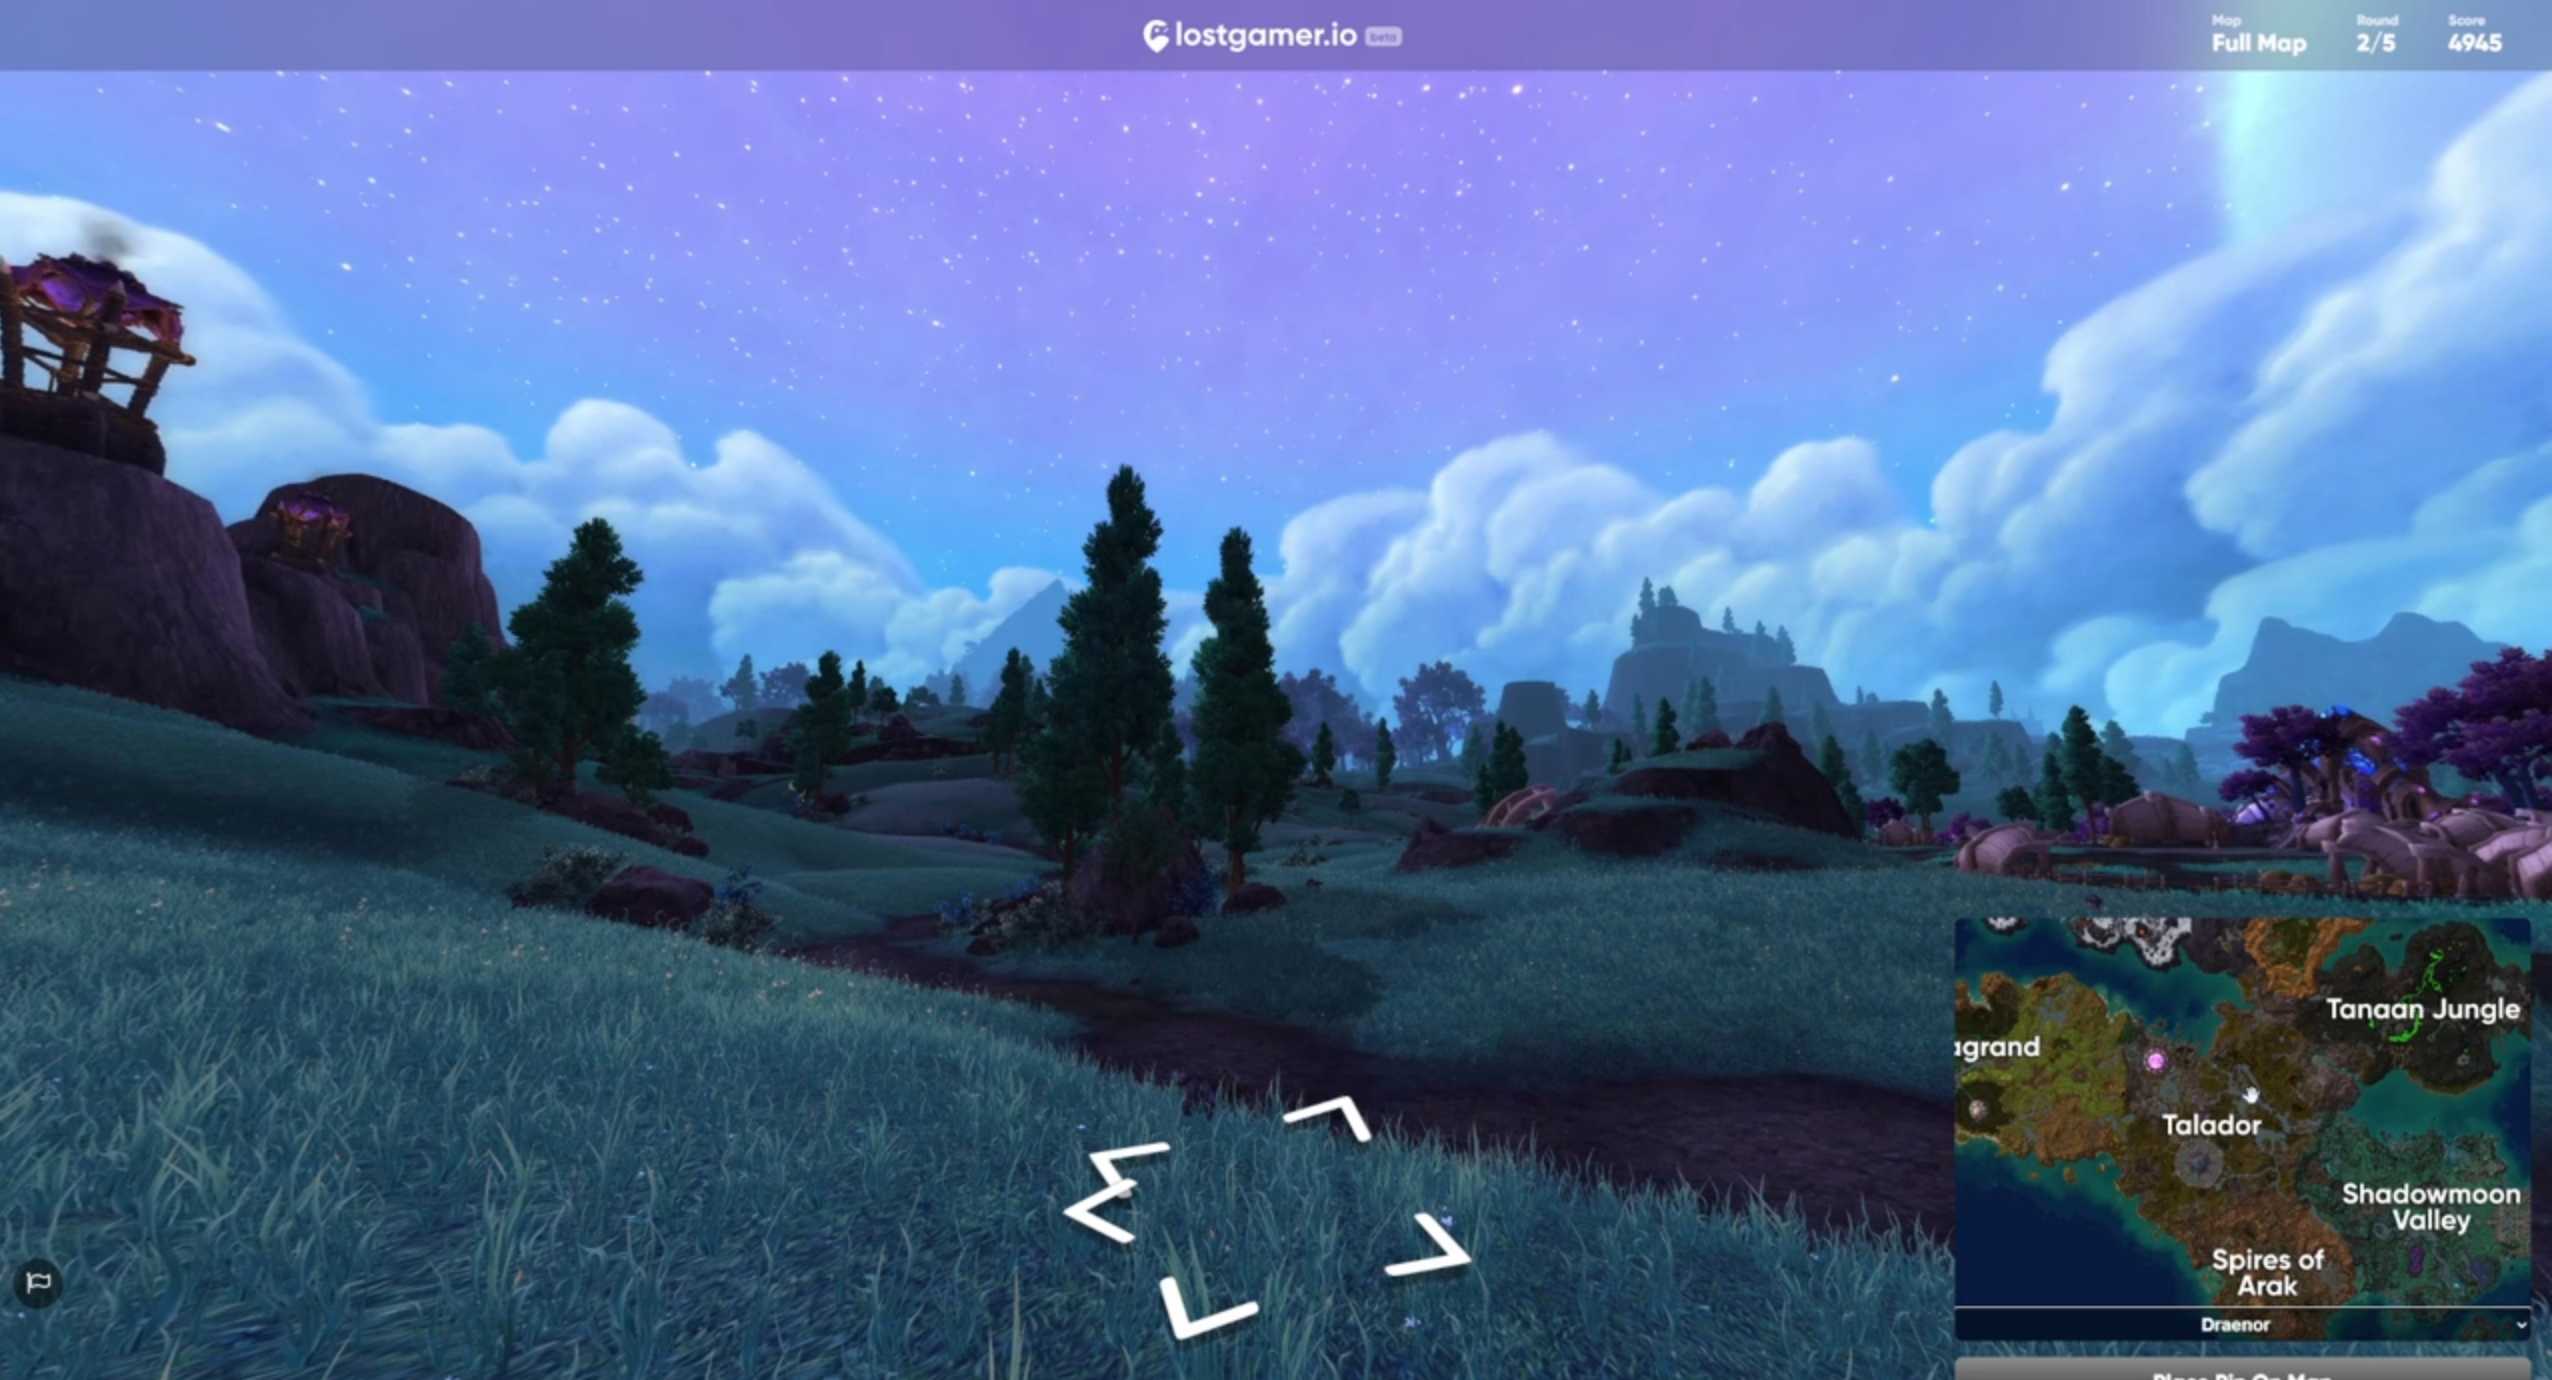 Explore Azeroth with World of Warcraft GeoGuessr thumbnail